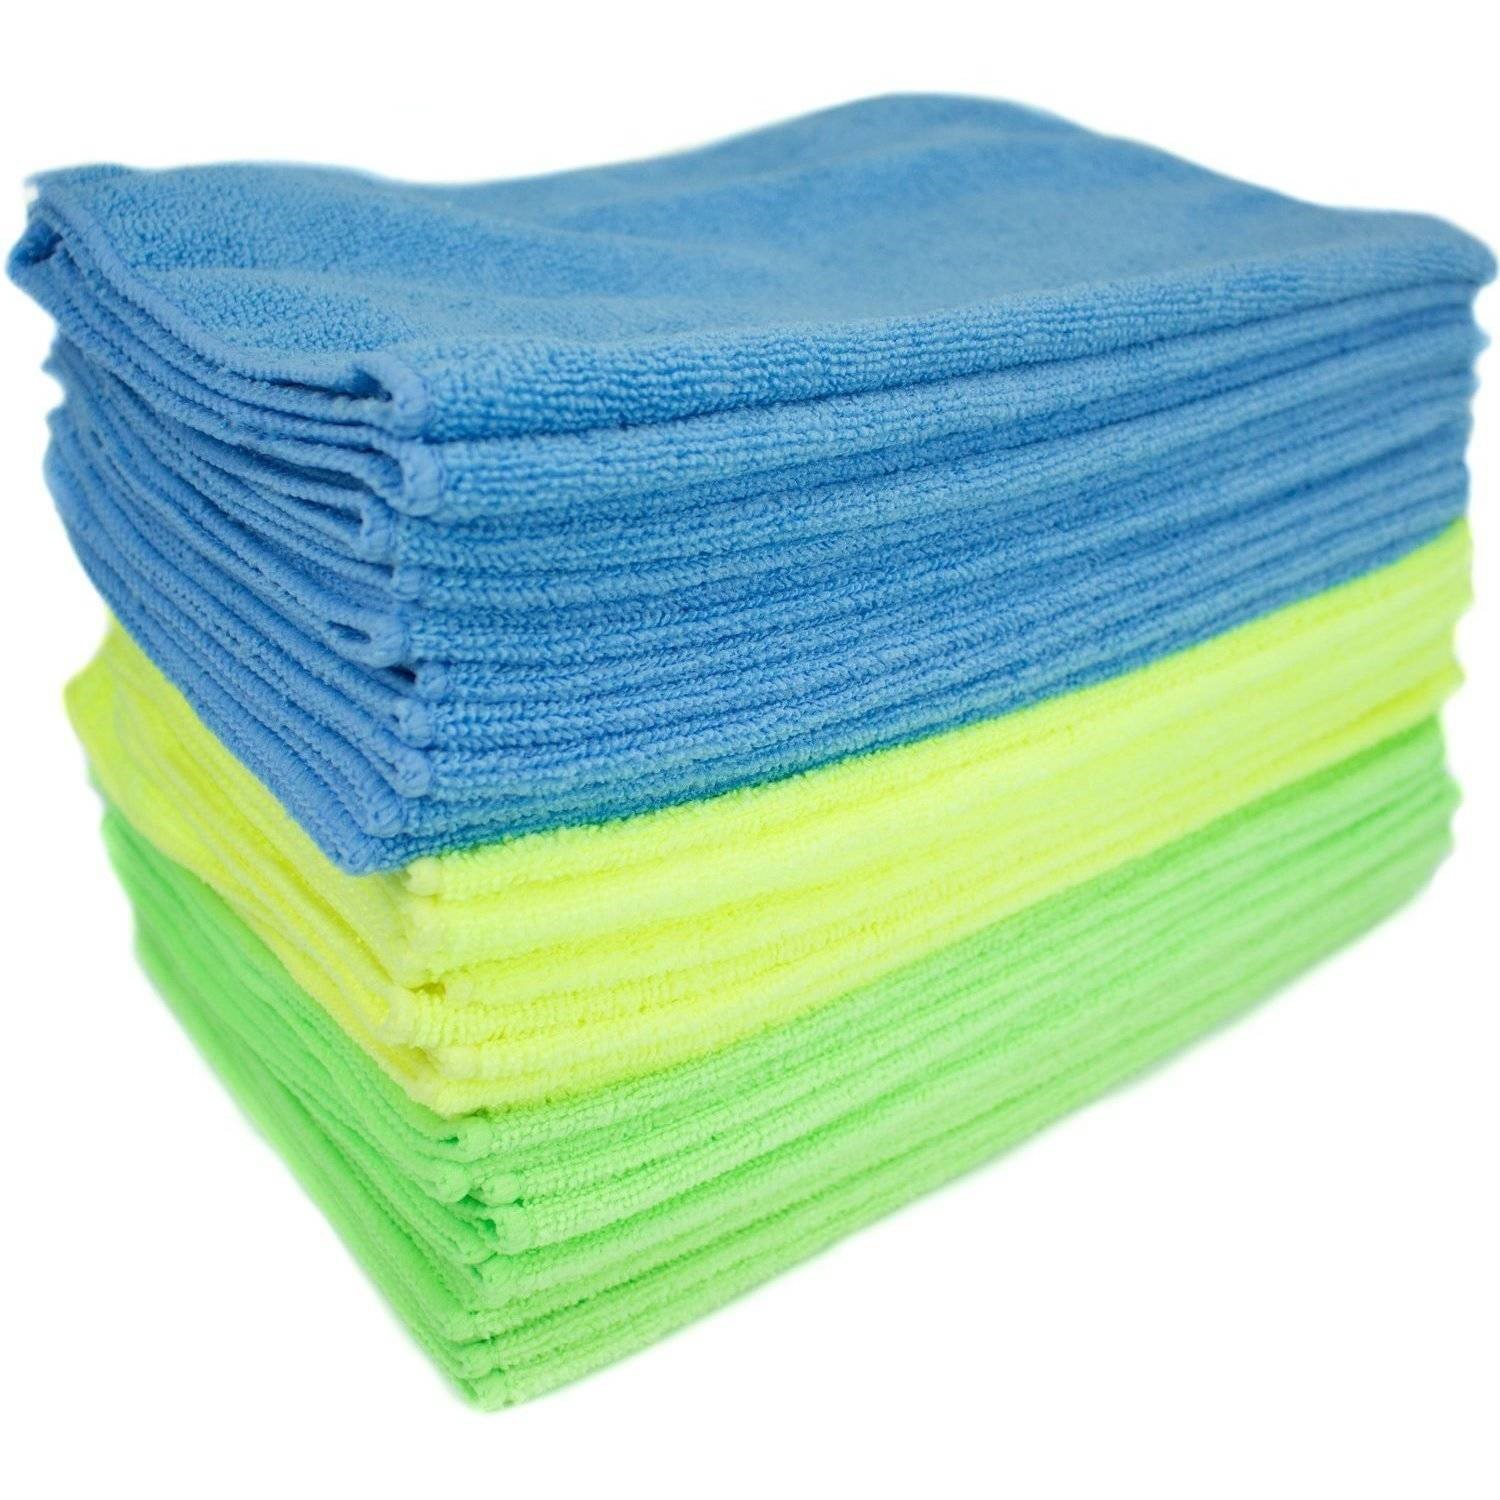 Zwipes Microfiber Cleaning Cloths, Multicolor, 12 Pack - image 3 of 13